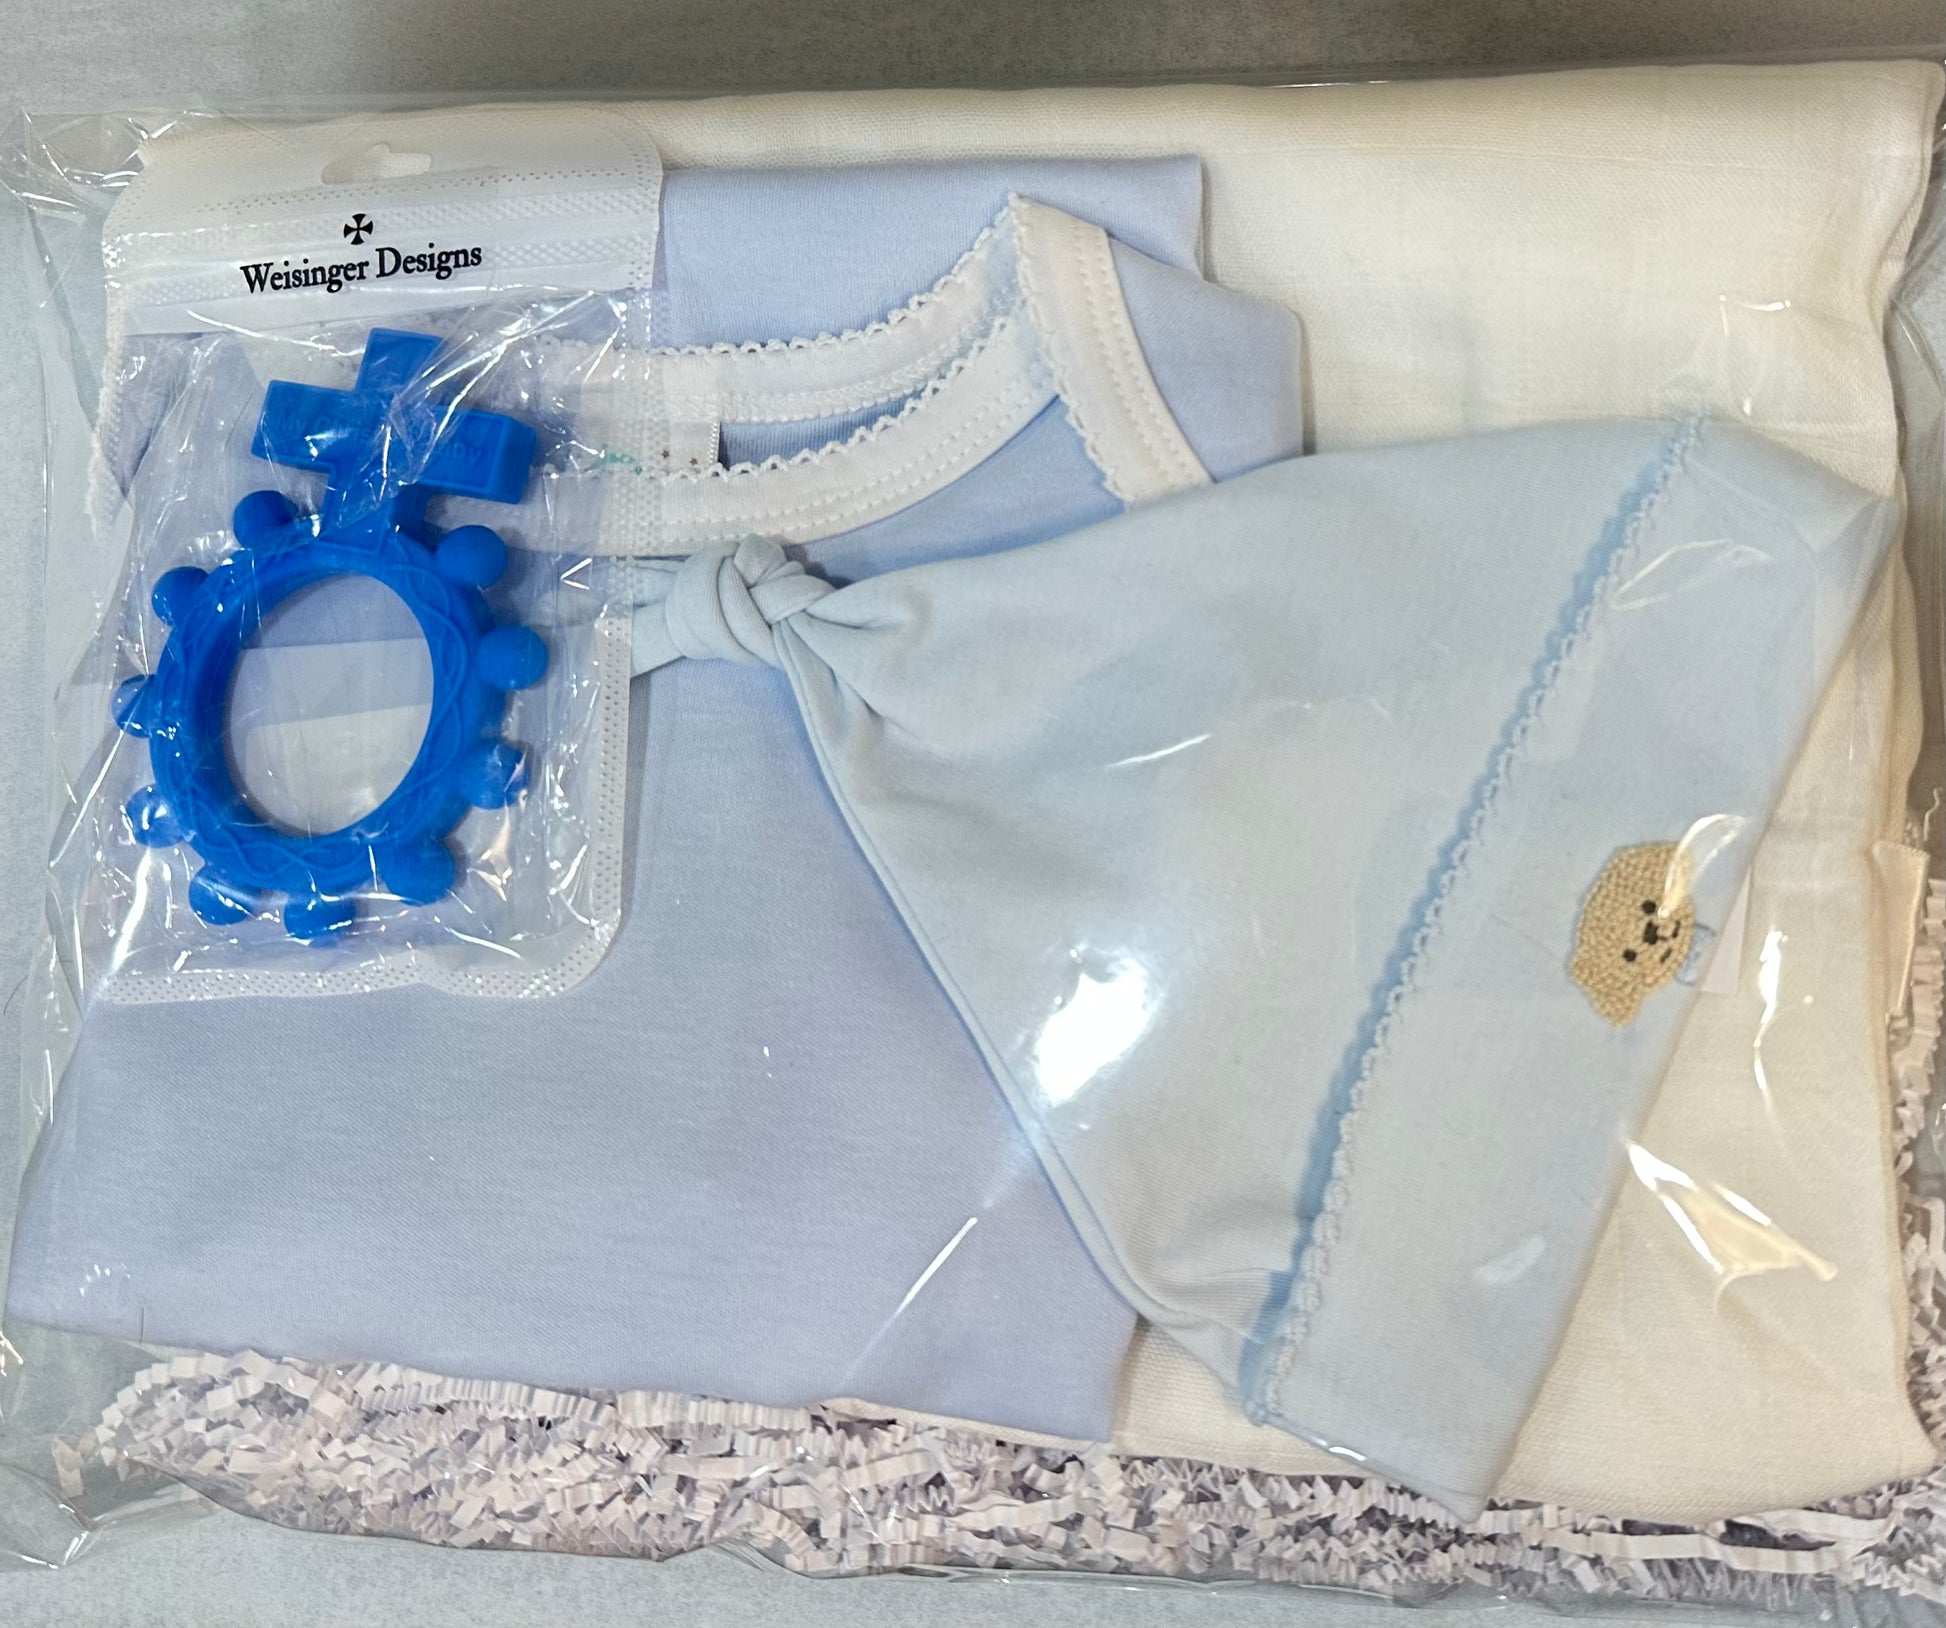 An adorable Baby Boy Bundle from Chickie Collective in a plastic bag.